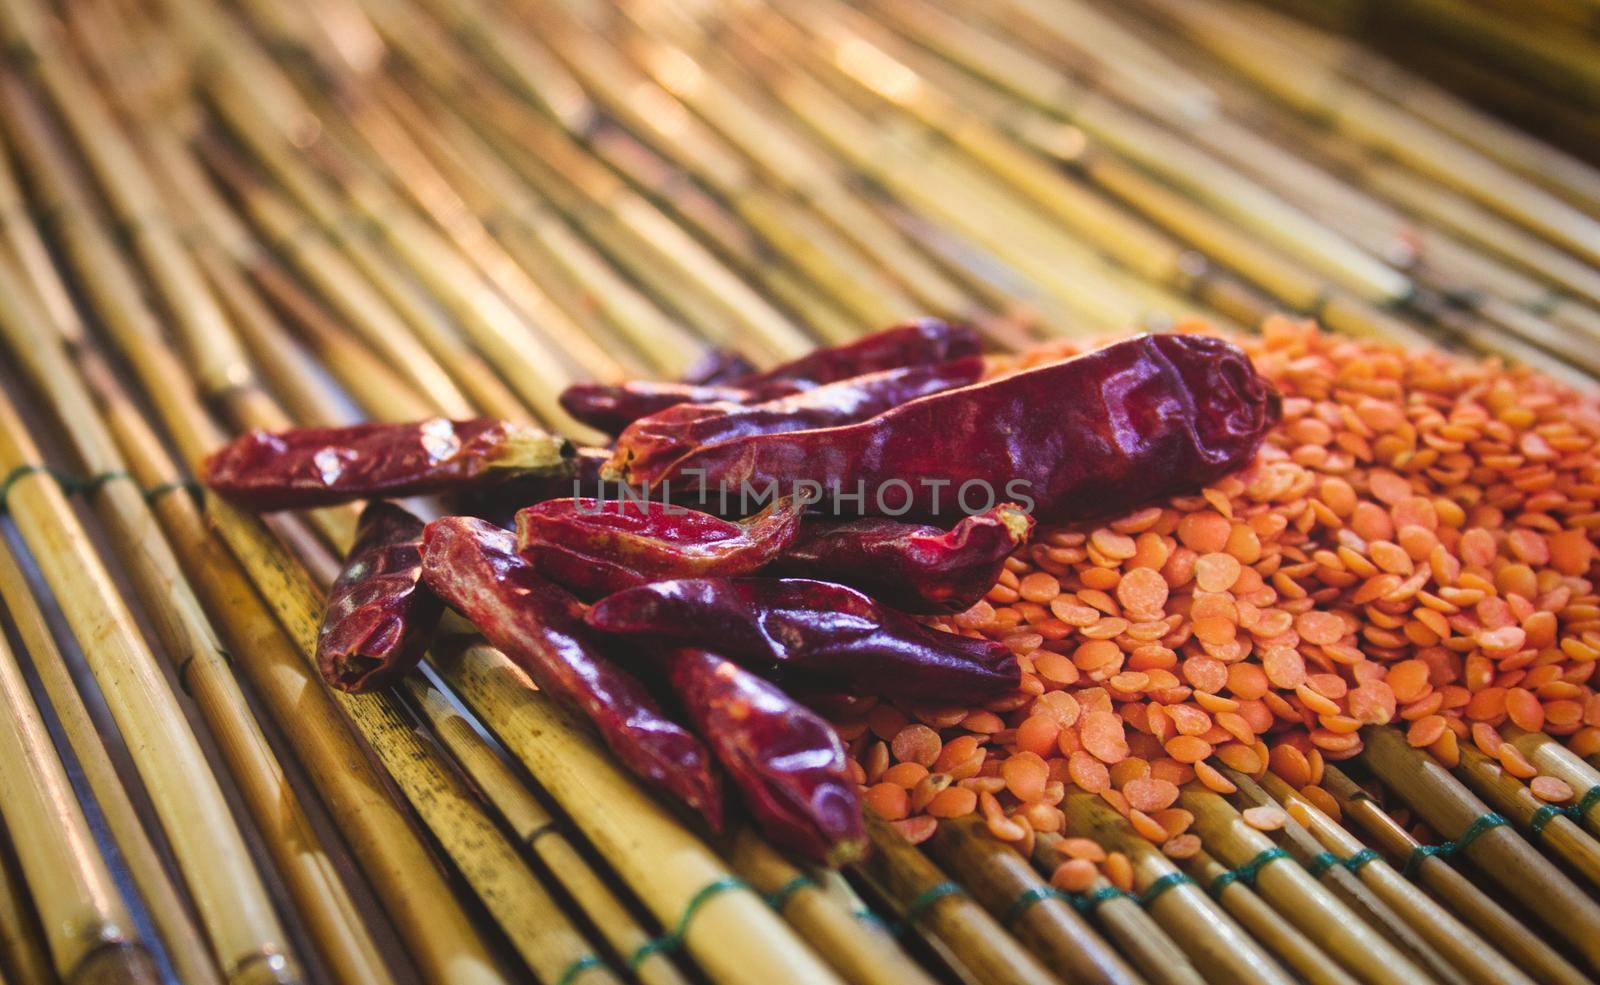 Chili peppers (Capsicum annuum) and red lentils on a bamboo mat